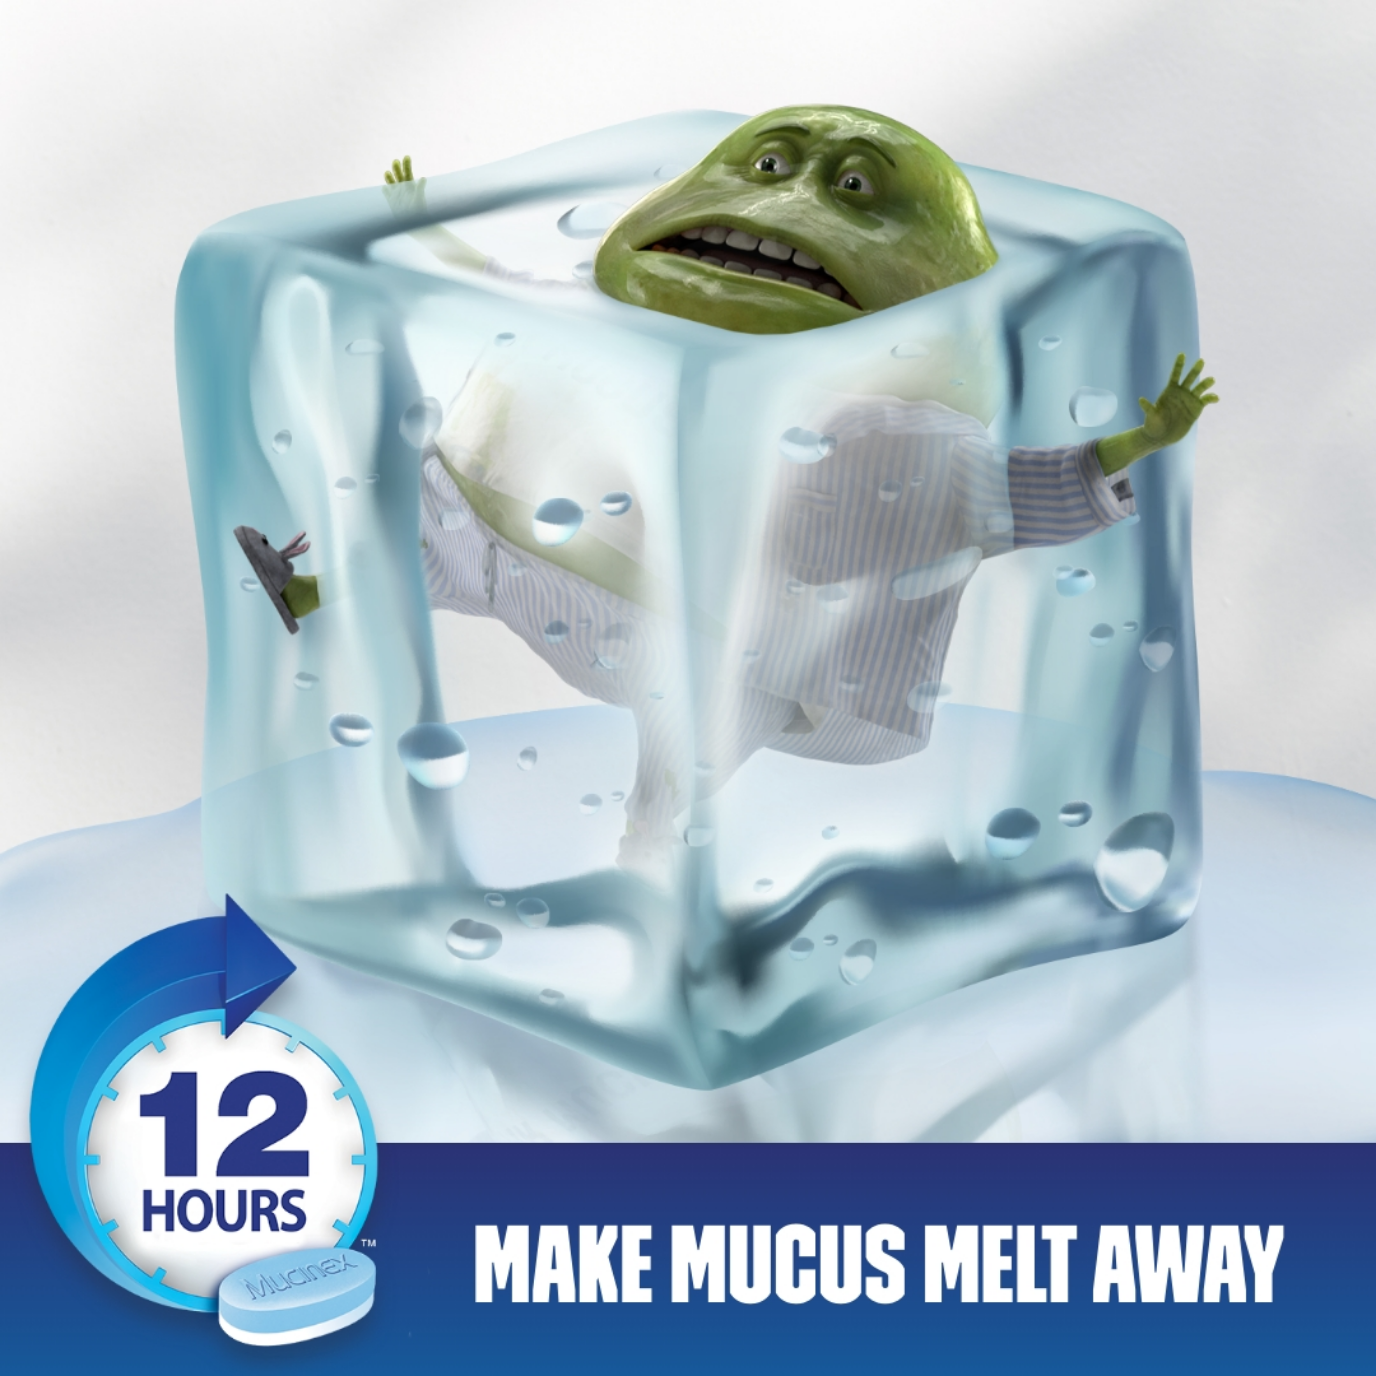 Having fun with Mr. Mucus using some quick AI renderings